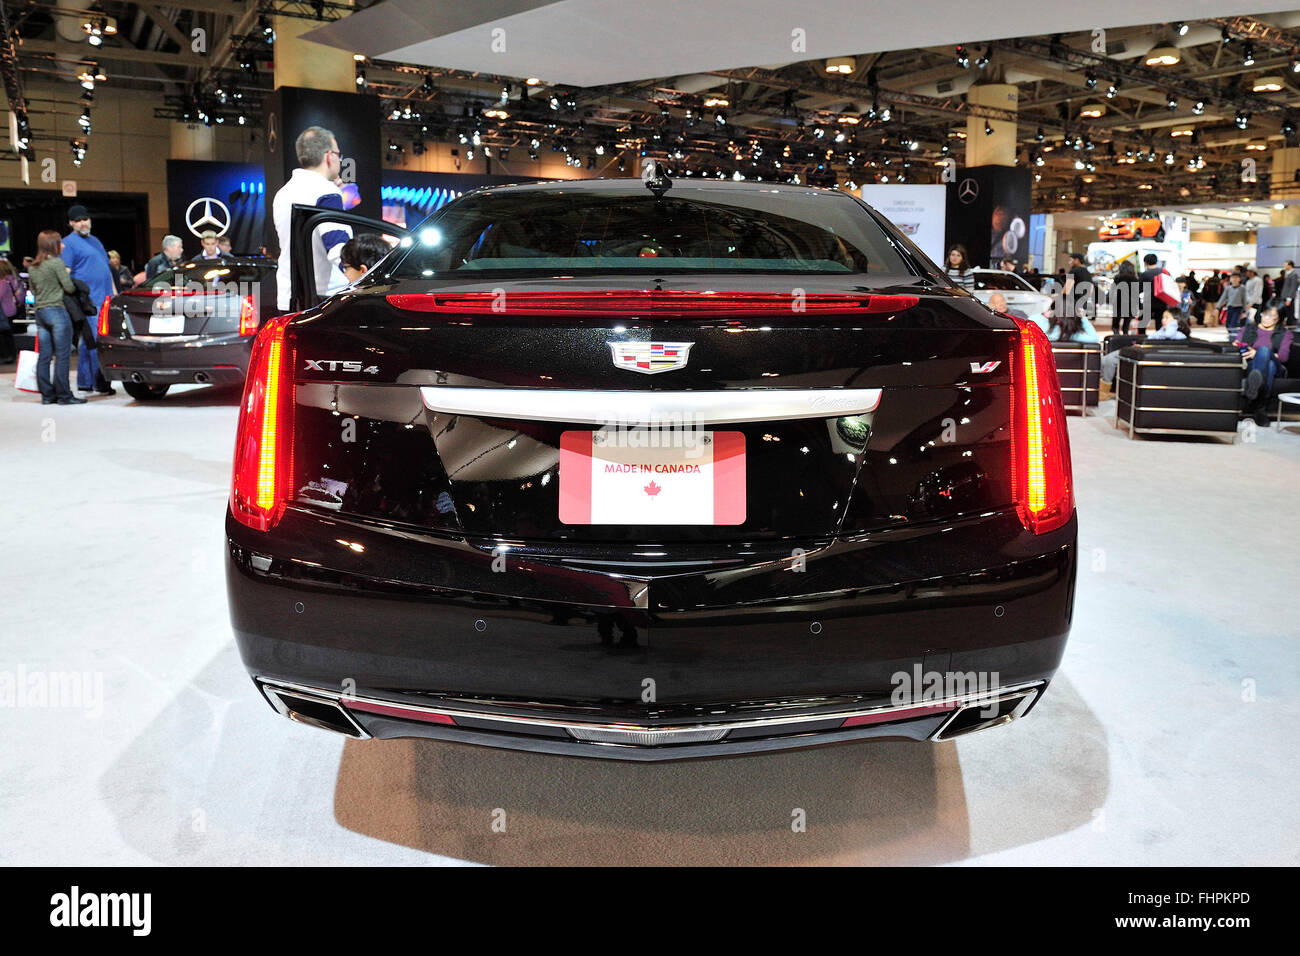 A Canadian made Cadillac XTS4 on display at the 2016 Toronto Autoshow at the Toronto Metro Convention Centre, Toronto, Ontario, Canada. February 14, 2016. Stock Photo